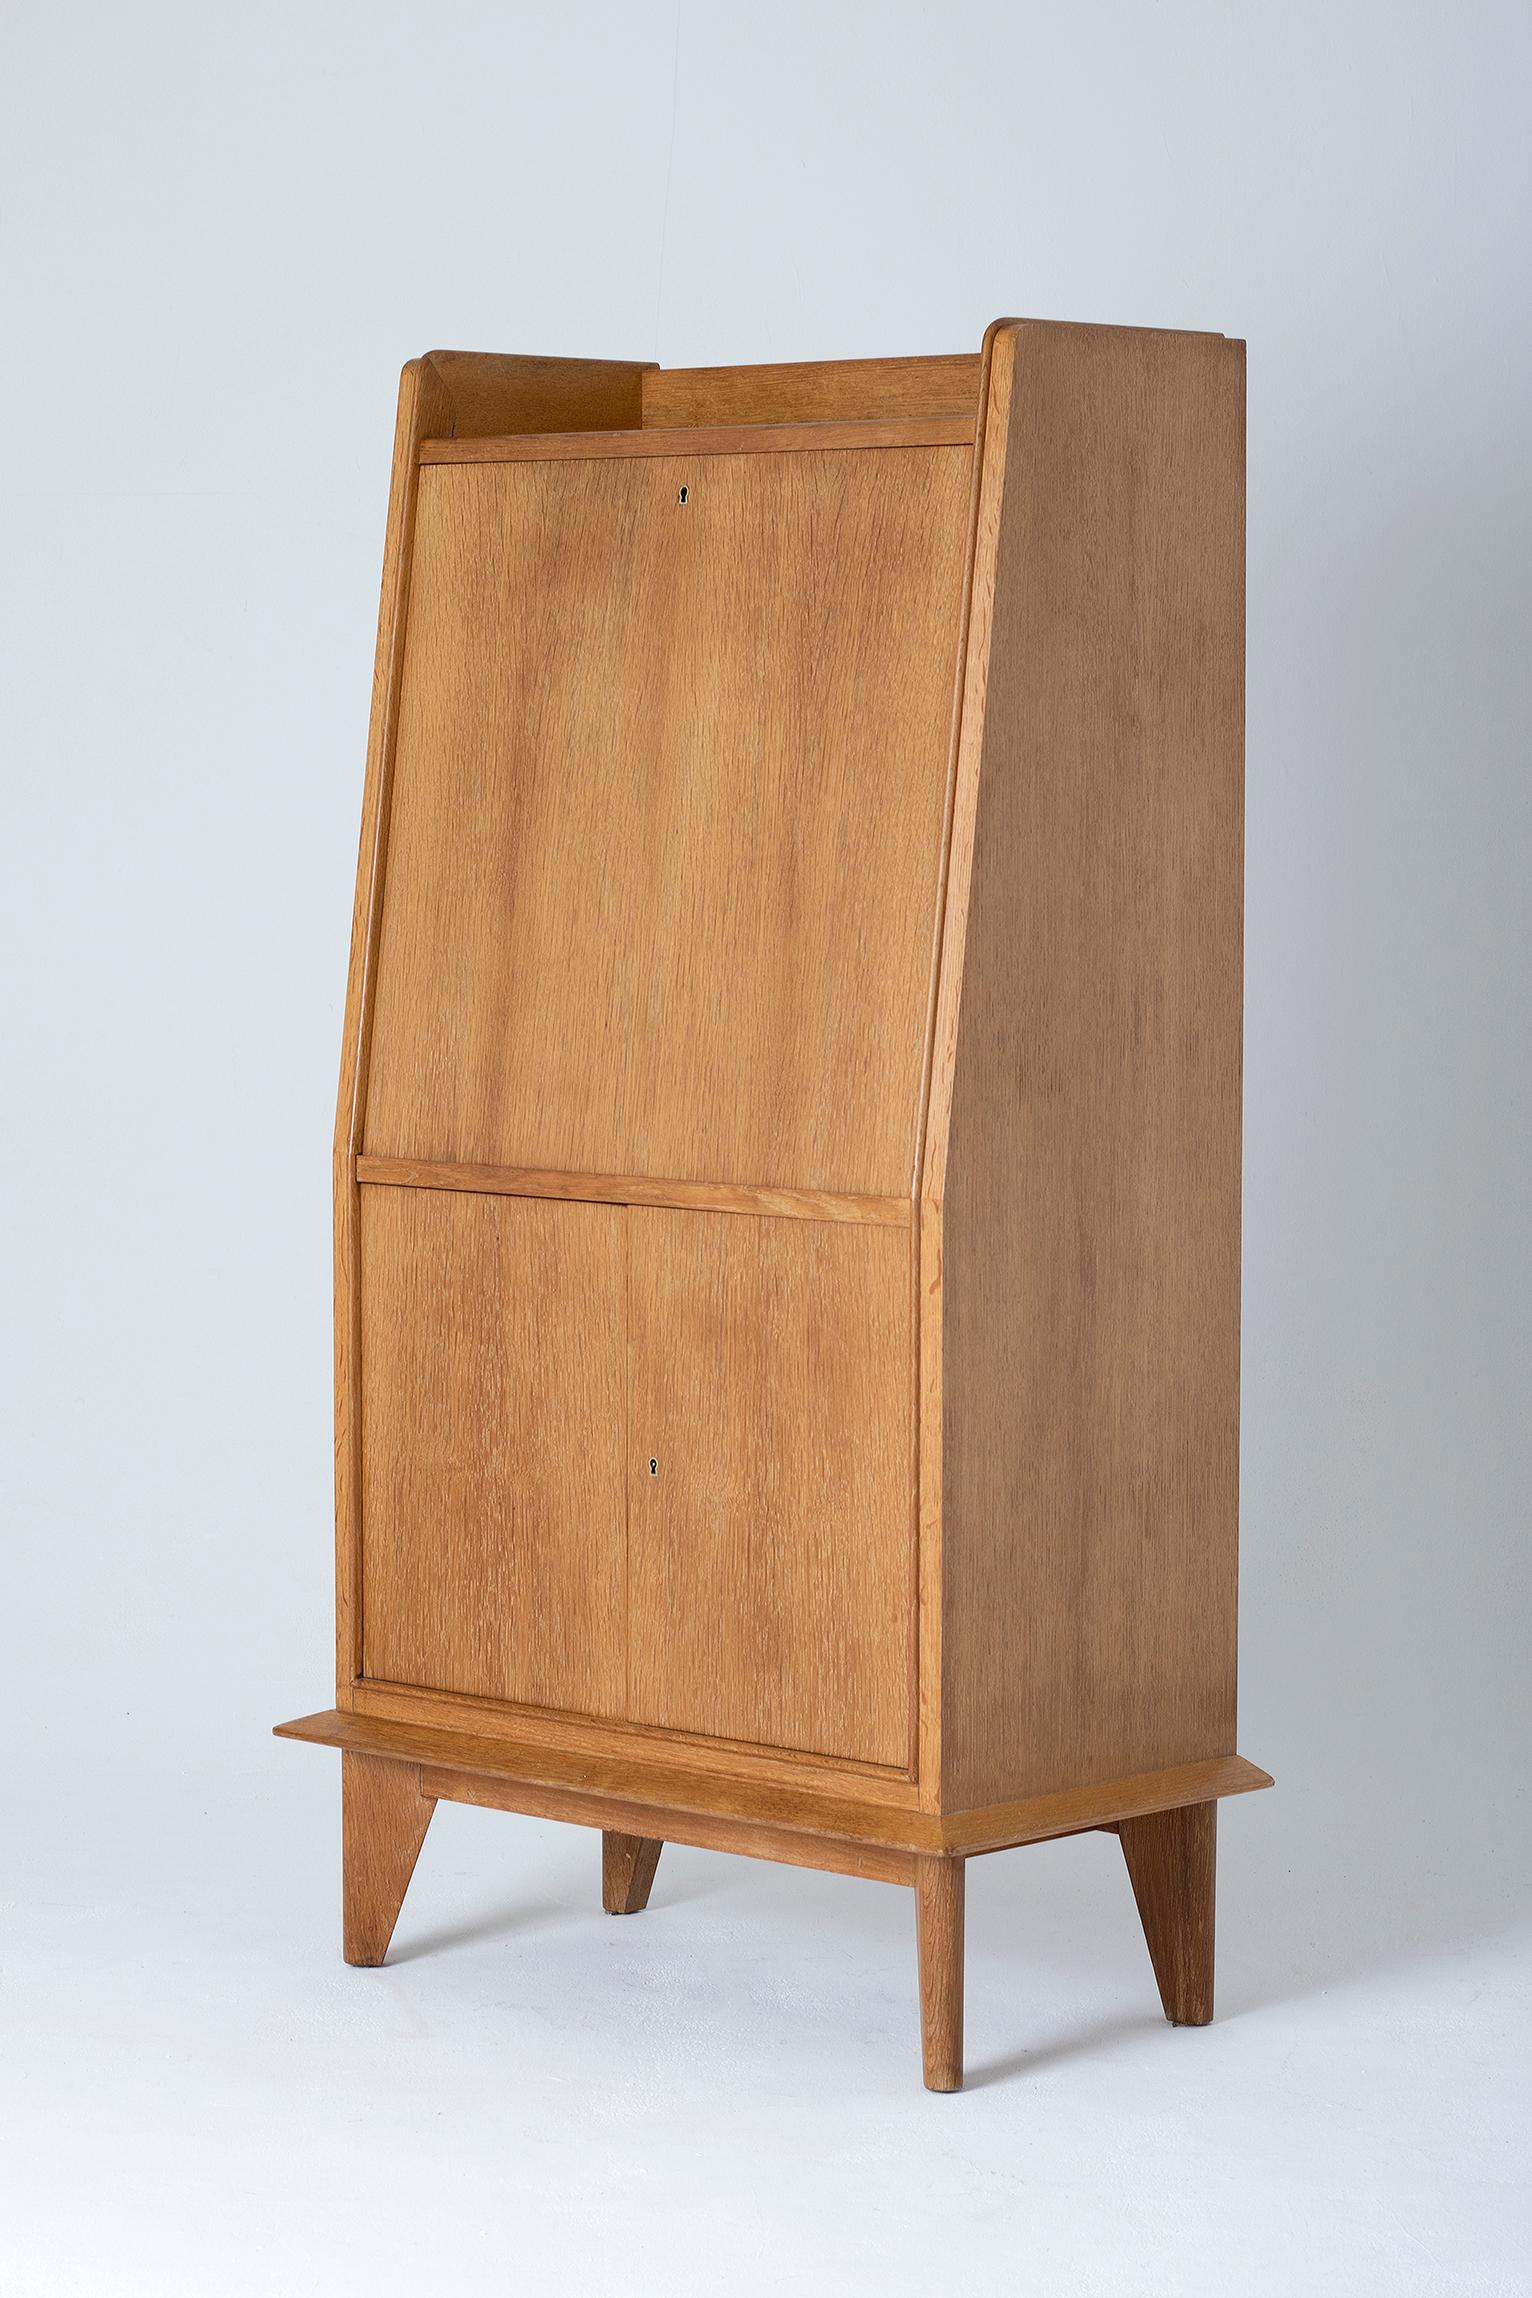 An Art Deco oak secrétaire cabinet, the abattant revealing a fully fitted oak secrétaire with pigeon holes, shelves and drawers with brass knobs, and a cream leather desk top.
France, circa 1940.